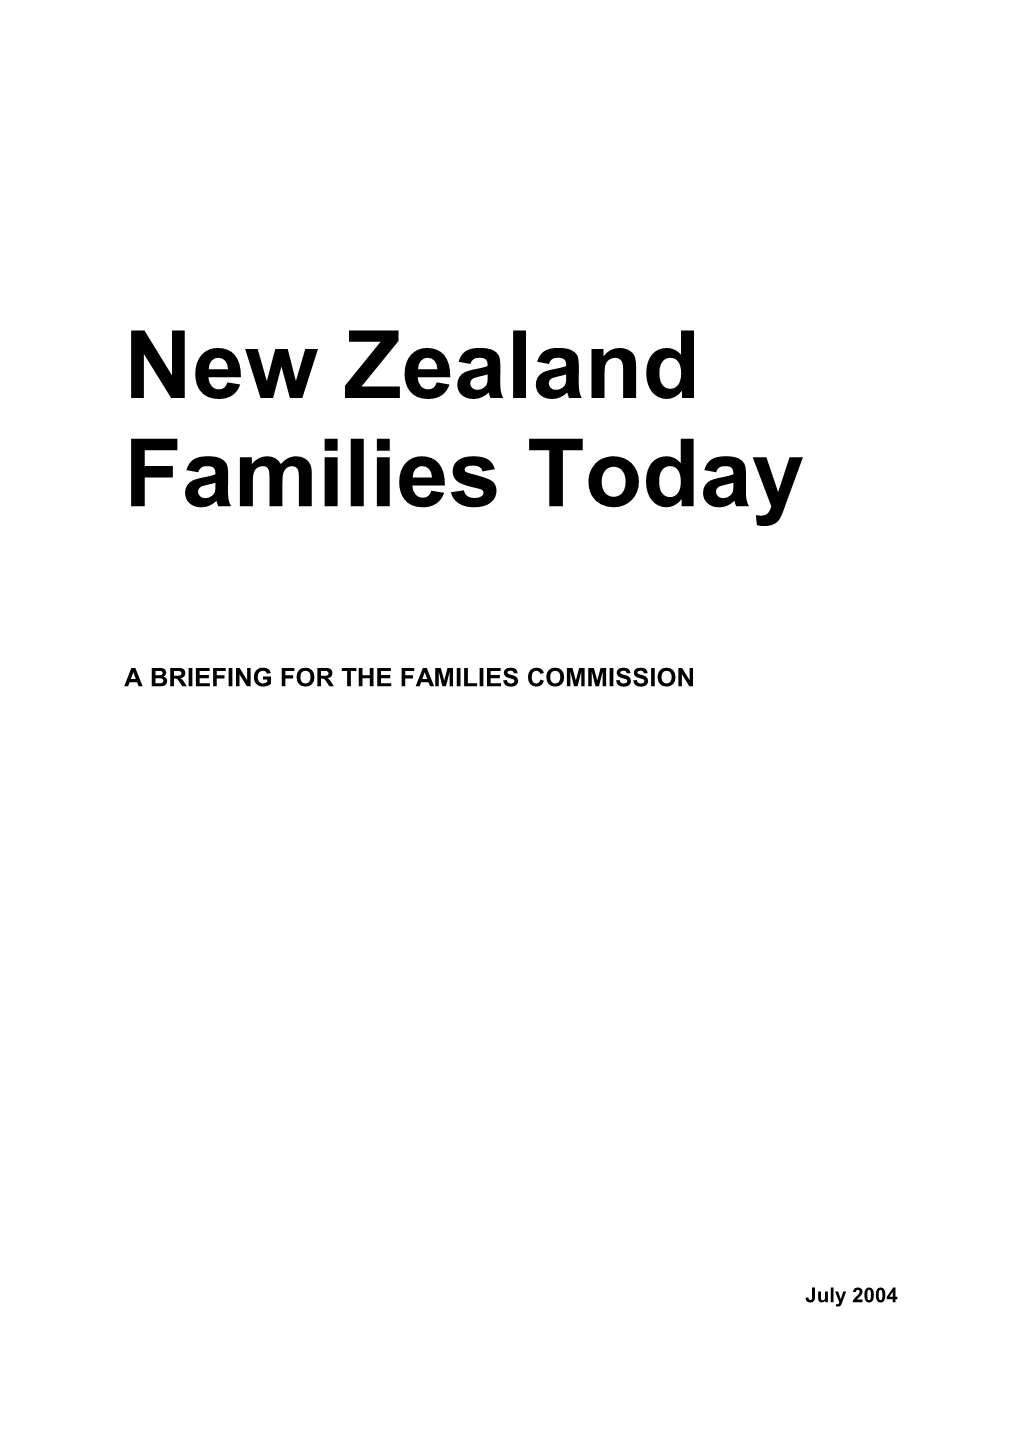 New Zealand Families Today